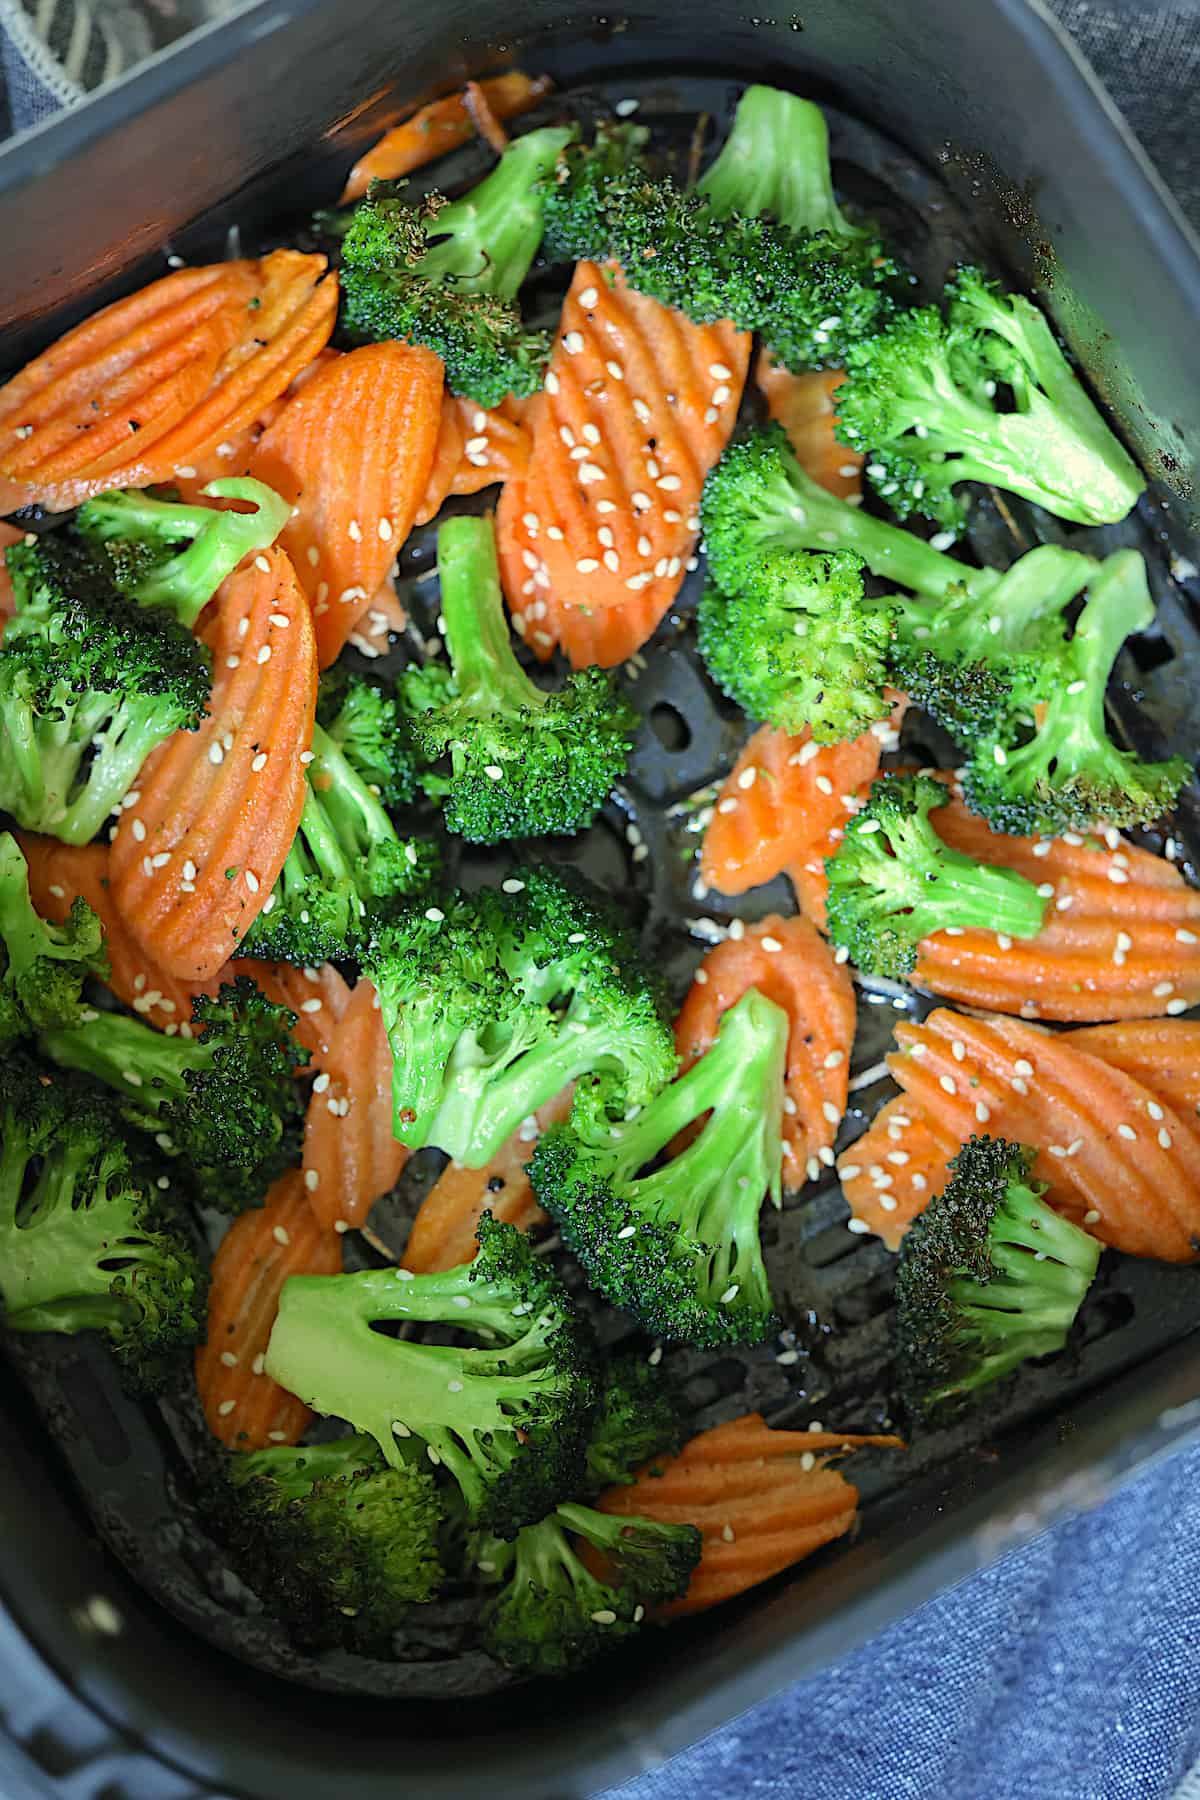 carrots and broccoli in an air fryer